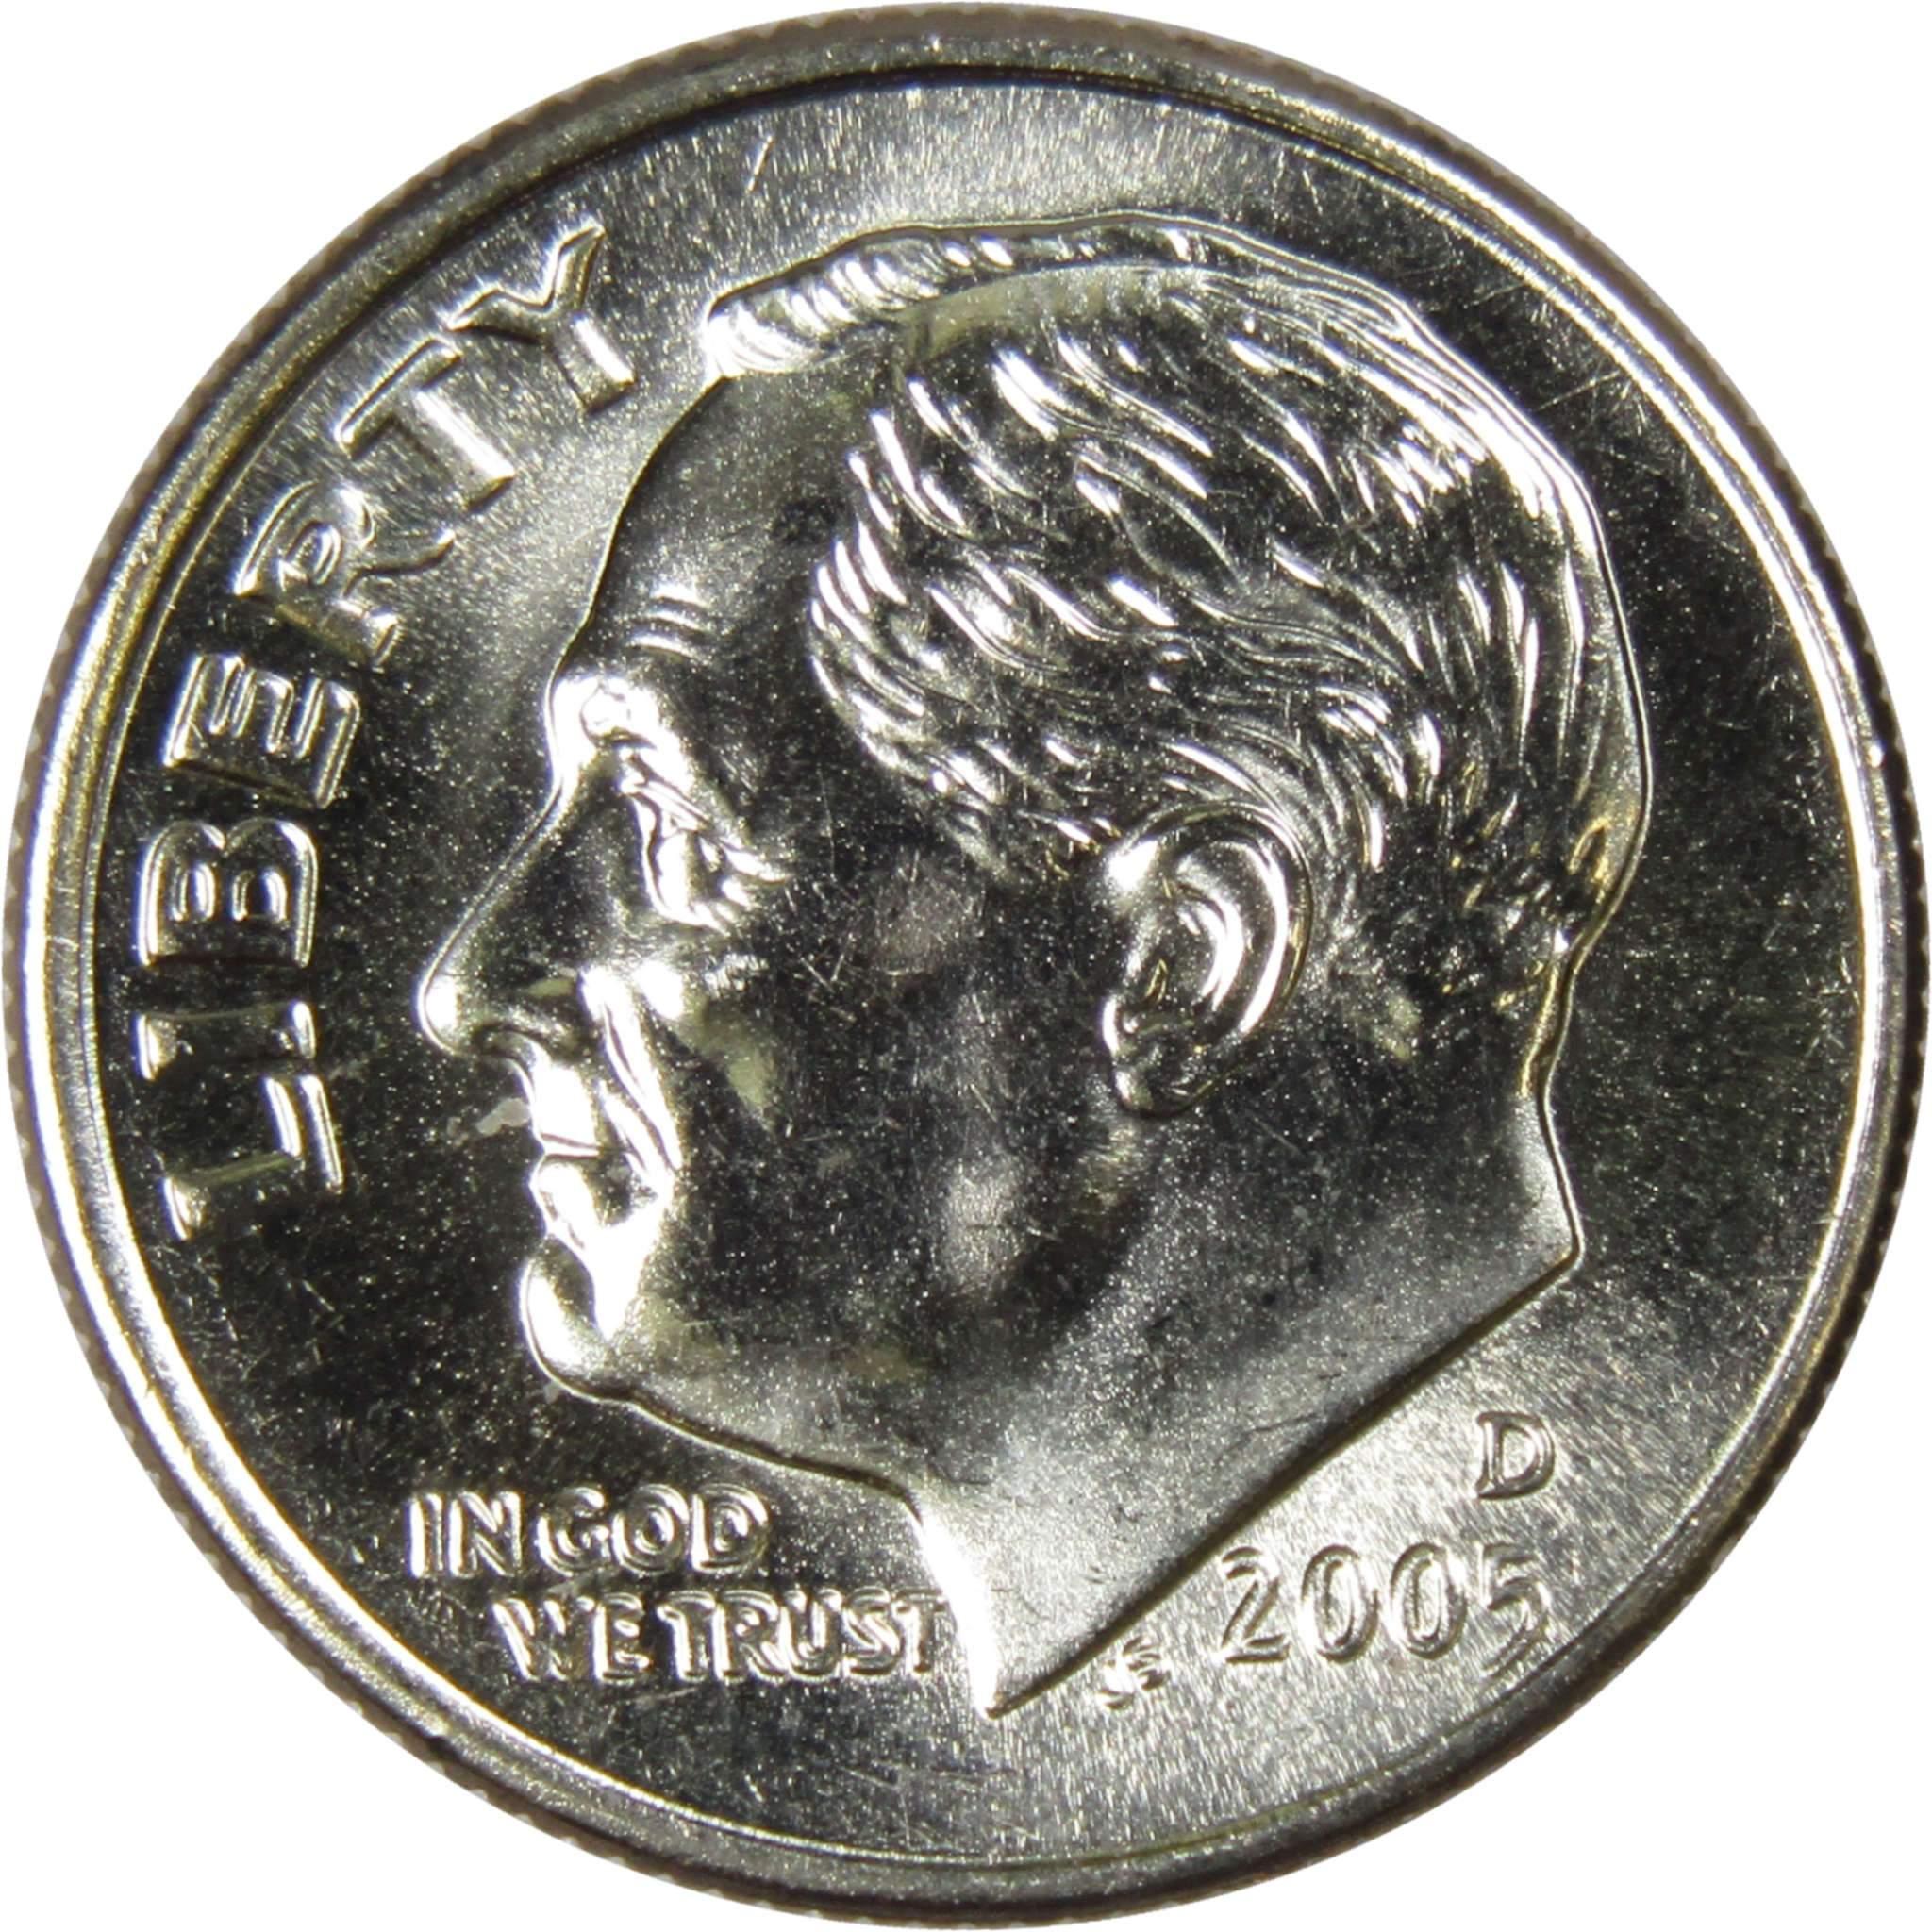 2005 D Roosevelt Dime BU Uncirculated Mint State 10c US Coin Collectible